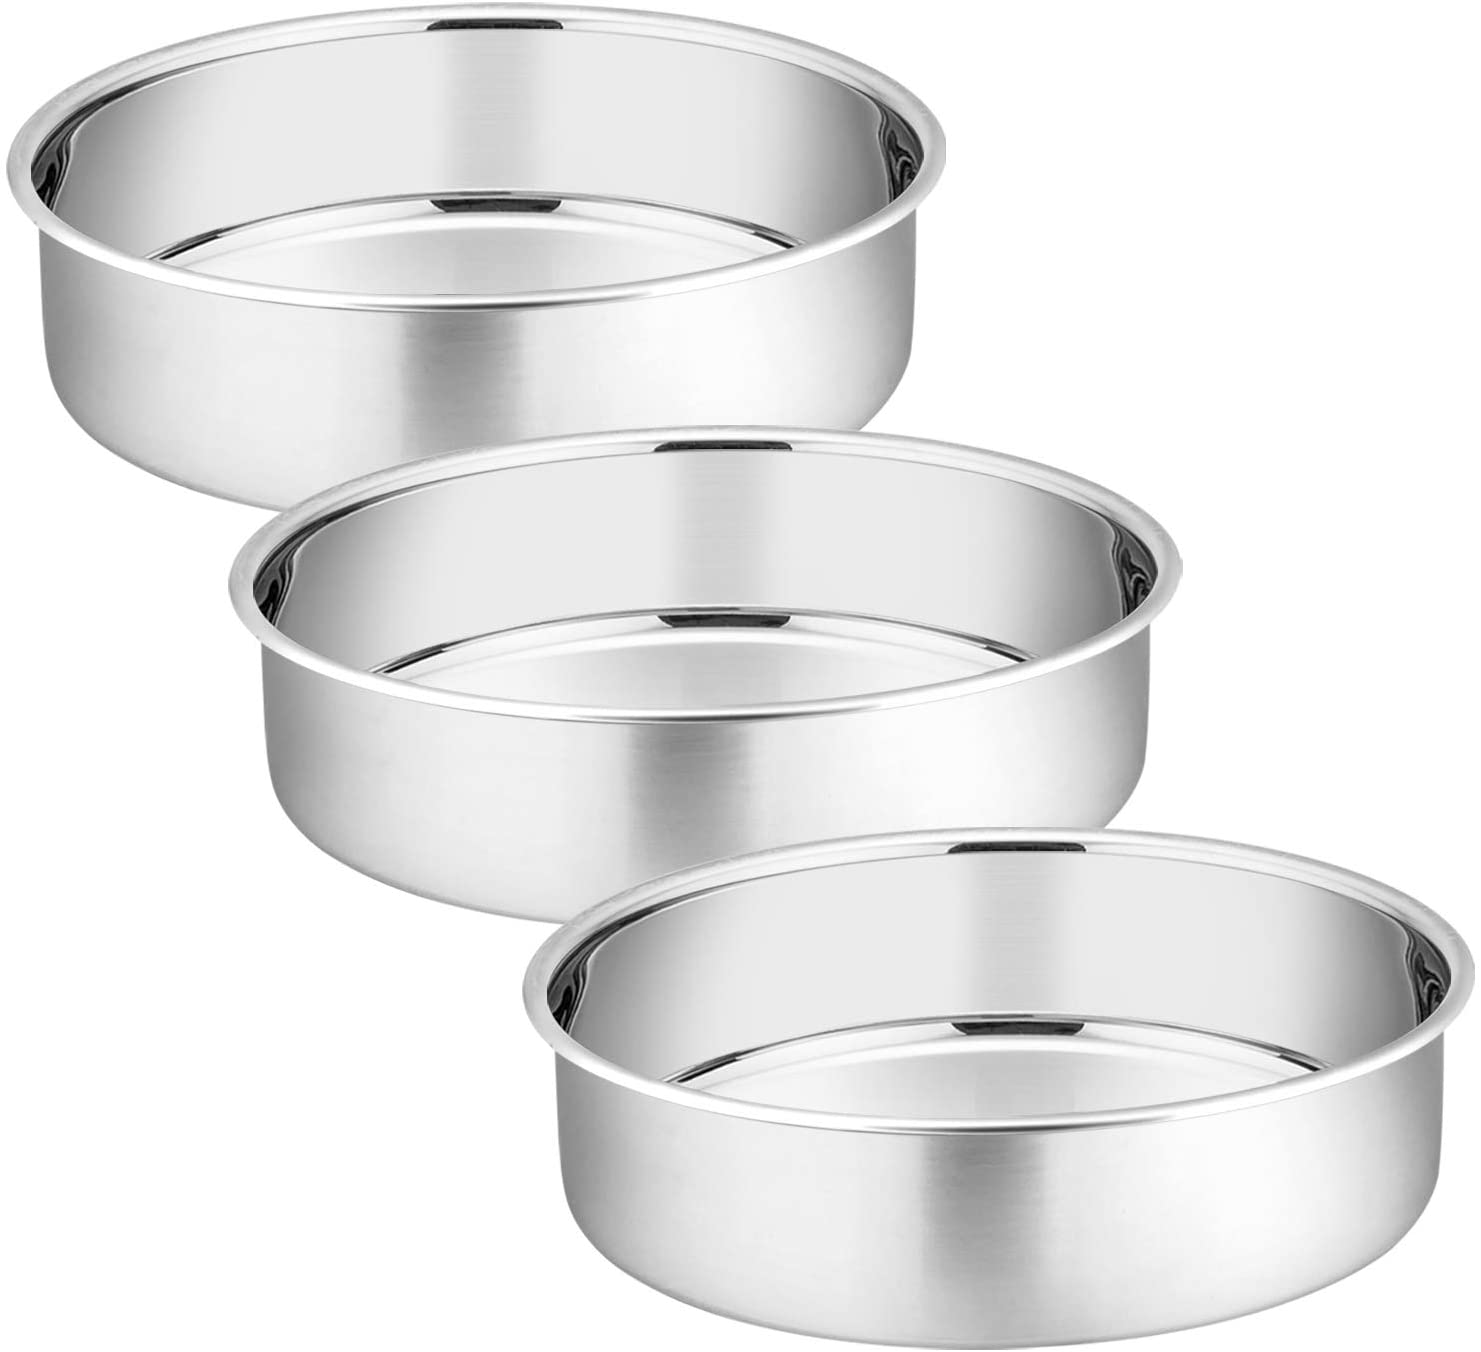 P&P CHEF 8-inch Cake Pan with Lid Set (3 Pans + 3 Lids), Stainless Steel  Round Baking Pan for Picnic Wedding Birthday, Leakproof Pan & Raised  Plastic